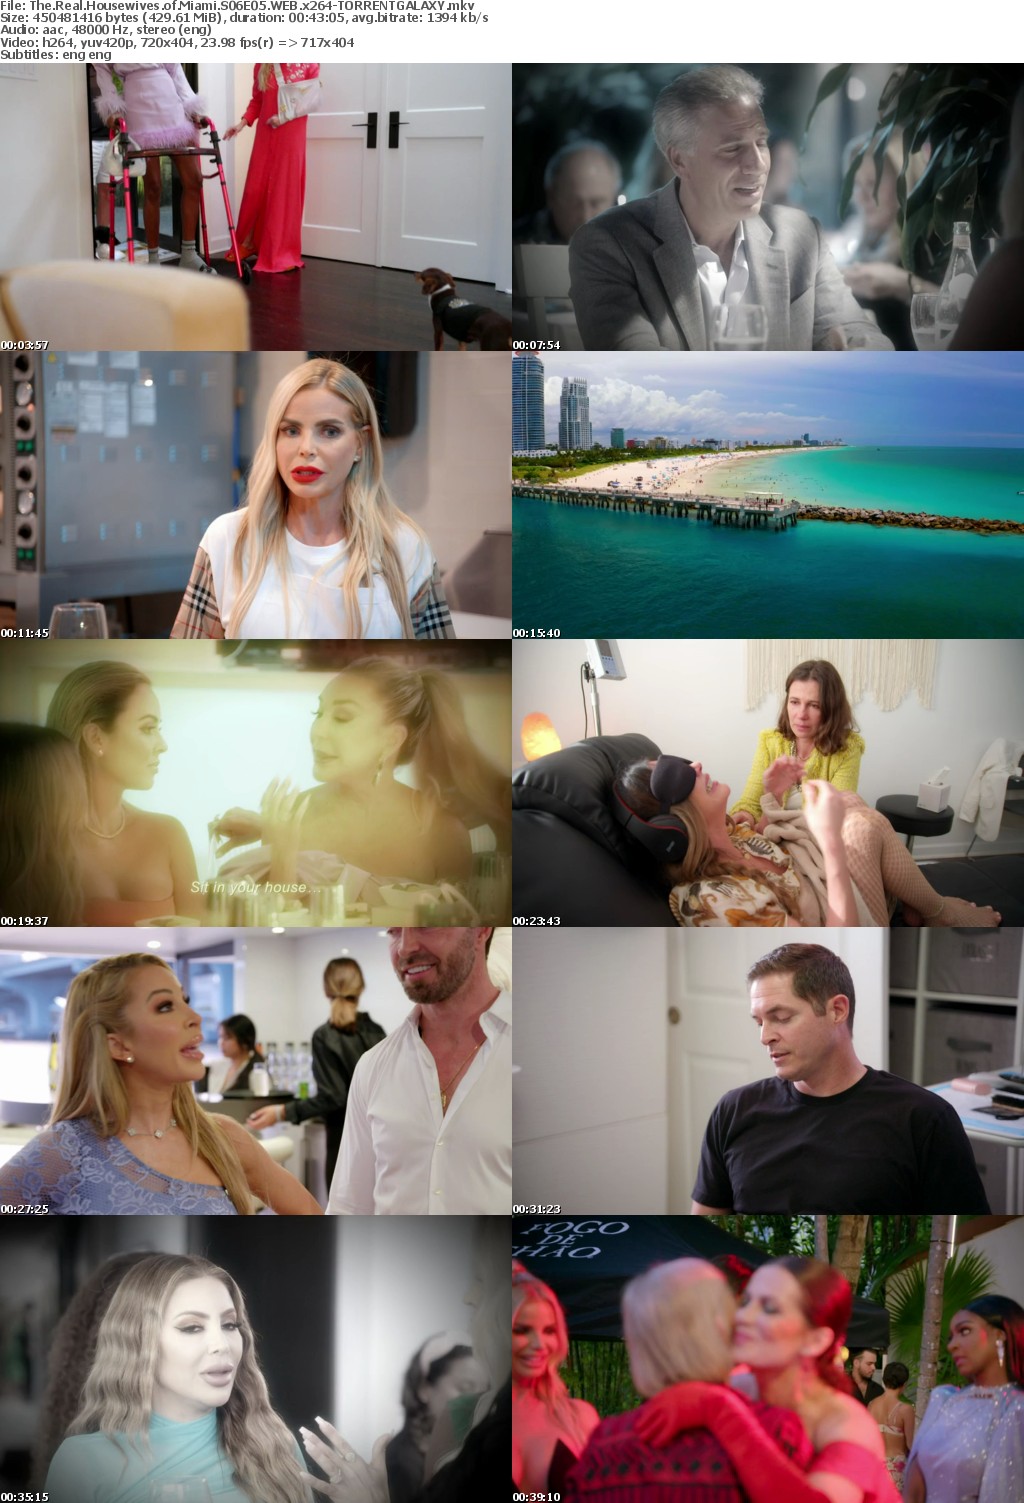 The Real Housewives of Miami S06E05 WEB x264-GALAXY